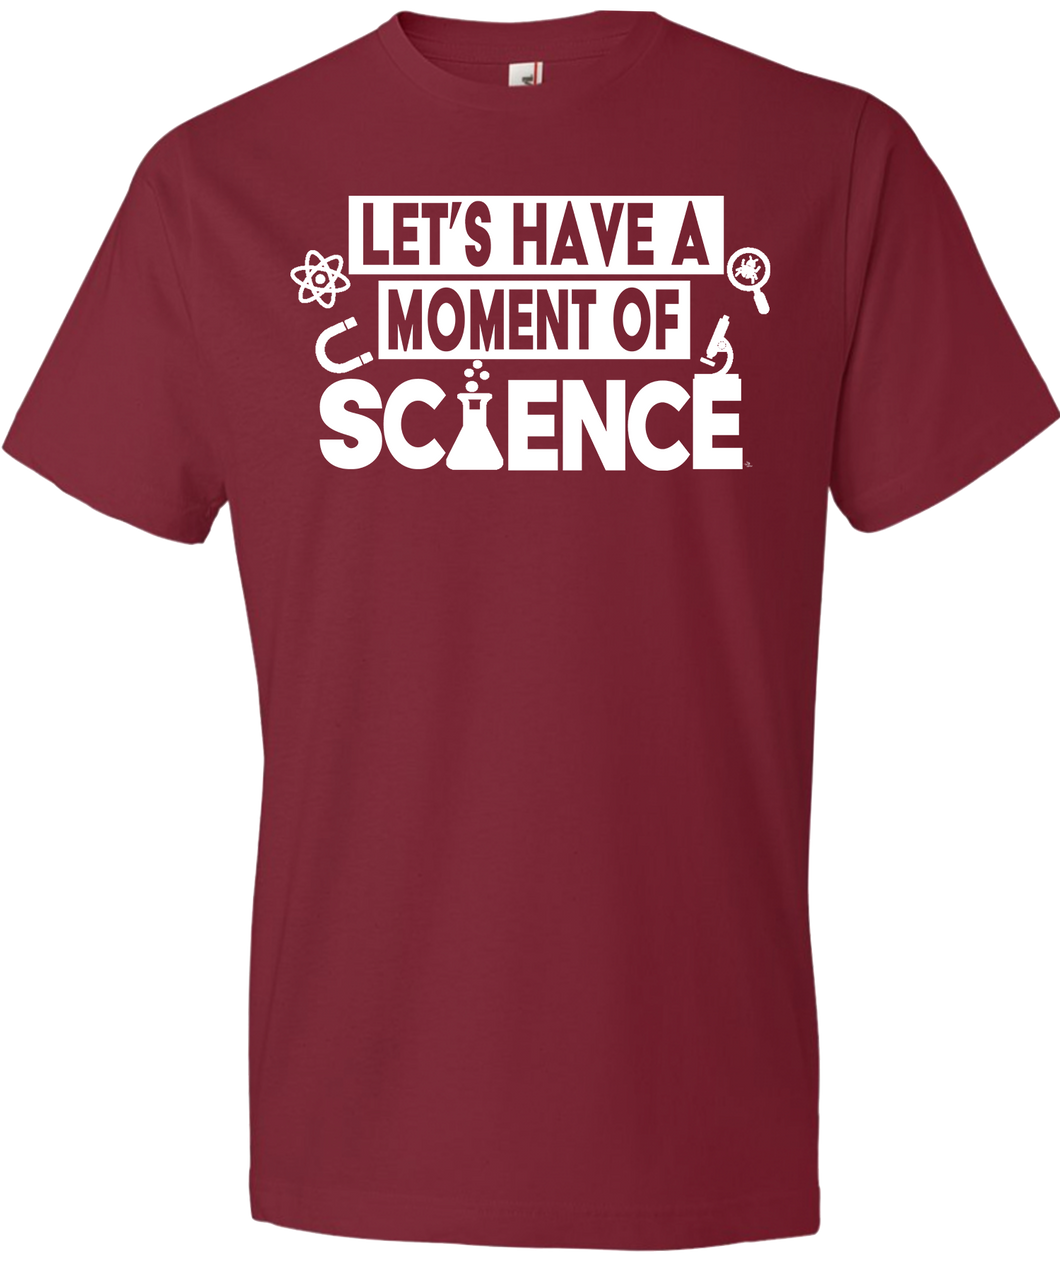 Let's Have a Moment of Science Tee